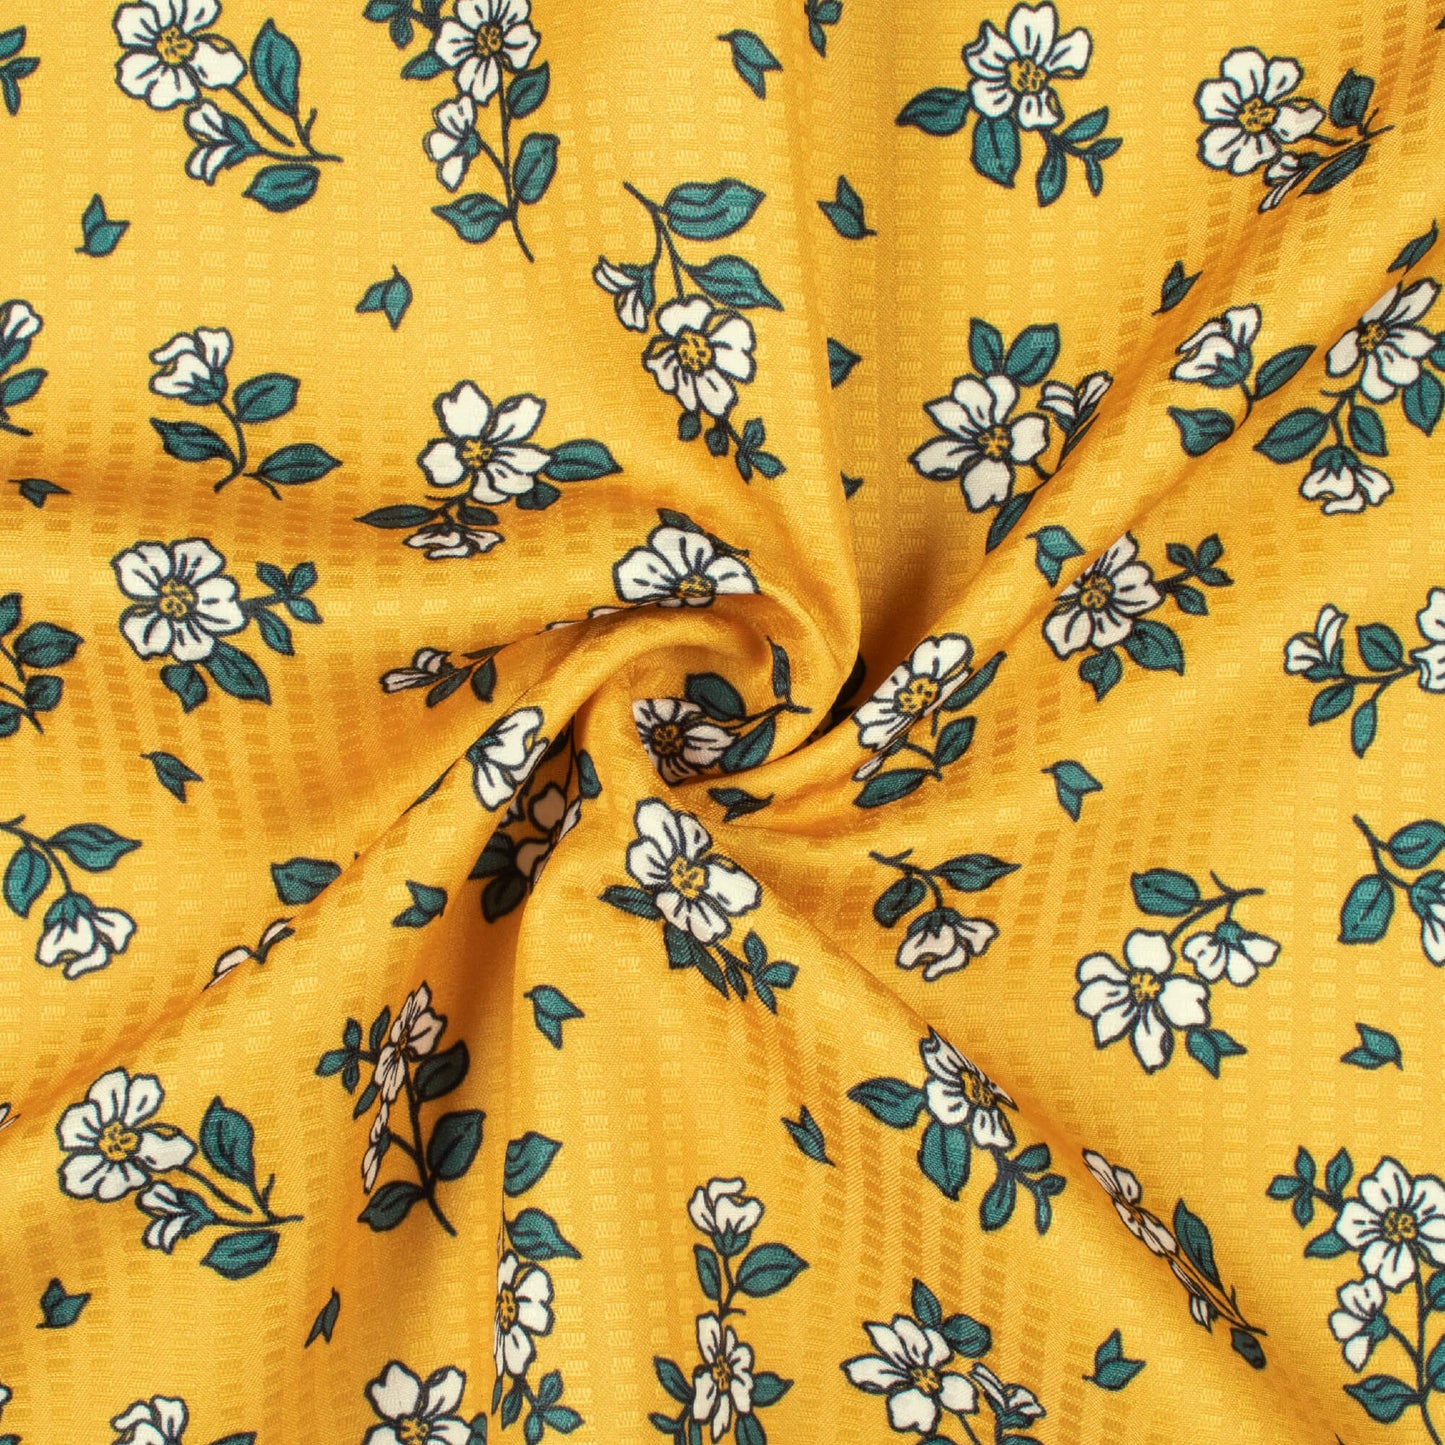 Tuscany Yellow And White Floral Pattern Digital Print Sherwani Fabric (Width 58 Inches)